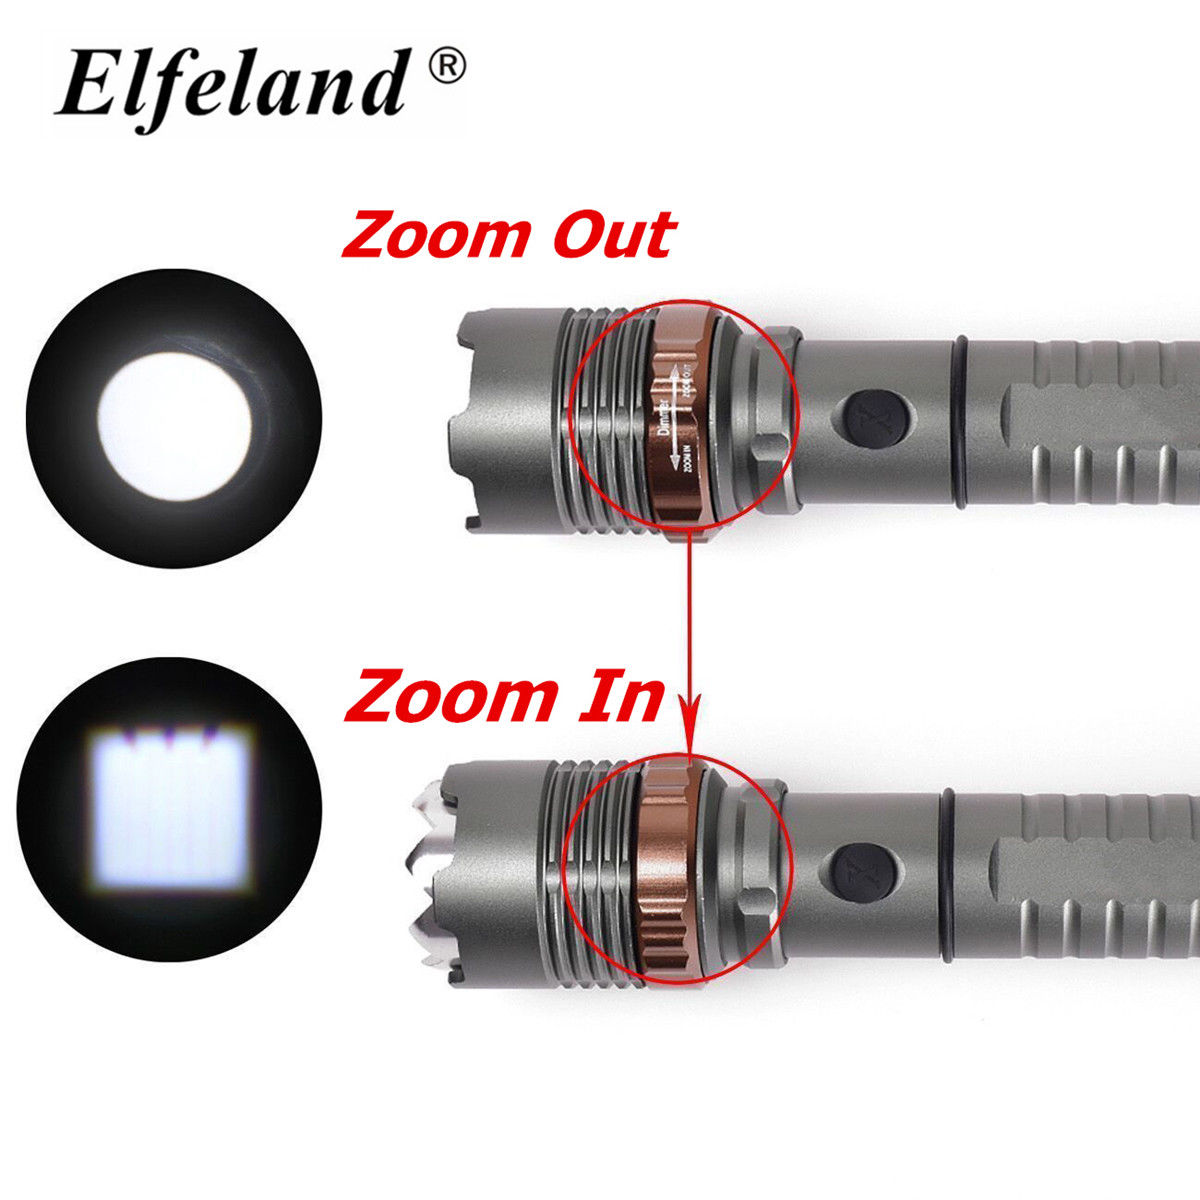 2600LM-T6-LED-Flashlight-Zoomable-5Modes-18650-Torch-Super-Bright-Torch-Lamp-For-Camping-Hiking-Cycl-1934827-2